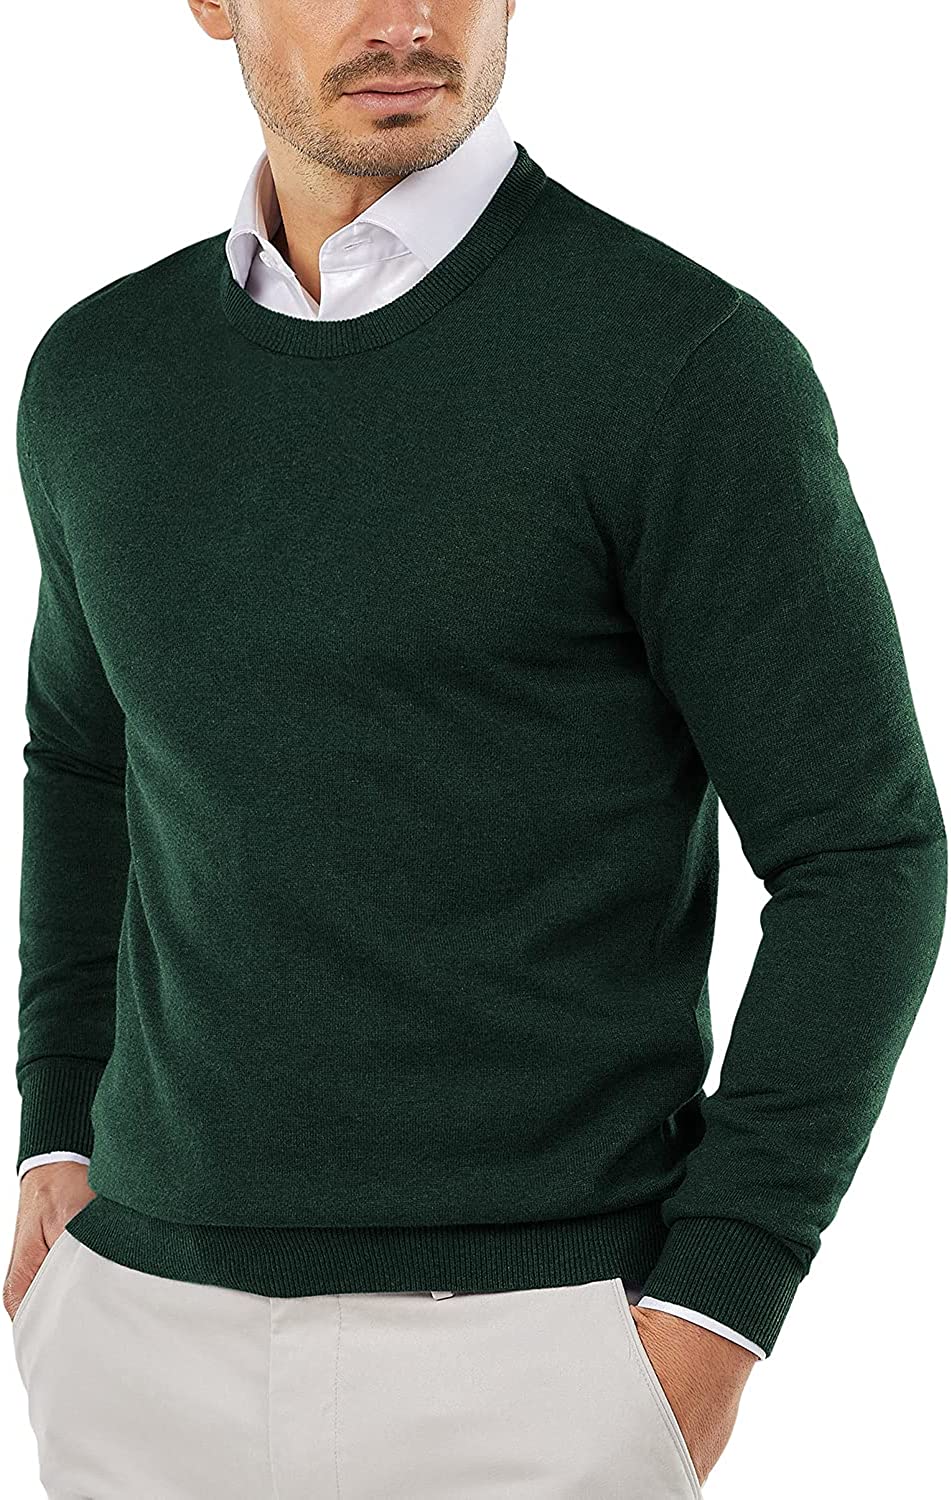 COOFANDY Men's Crew Neck Sweater Slim Fit Lightweight Sweatshirts Knitted  Pullover for Casual Or Dressy Wear